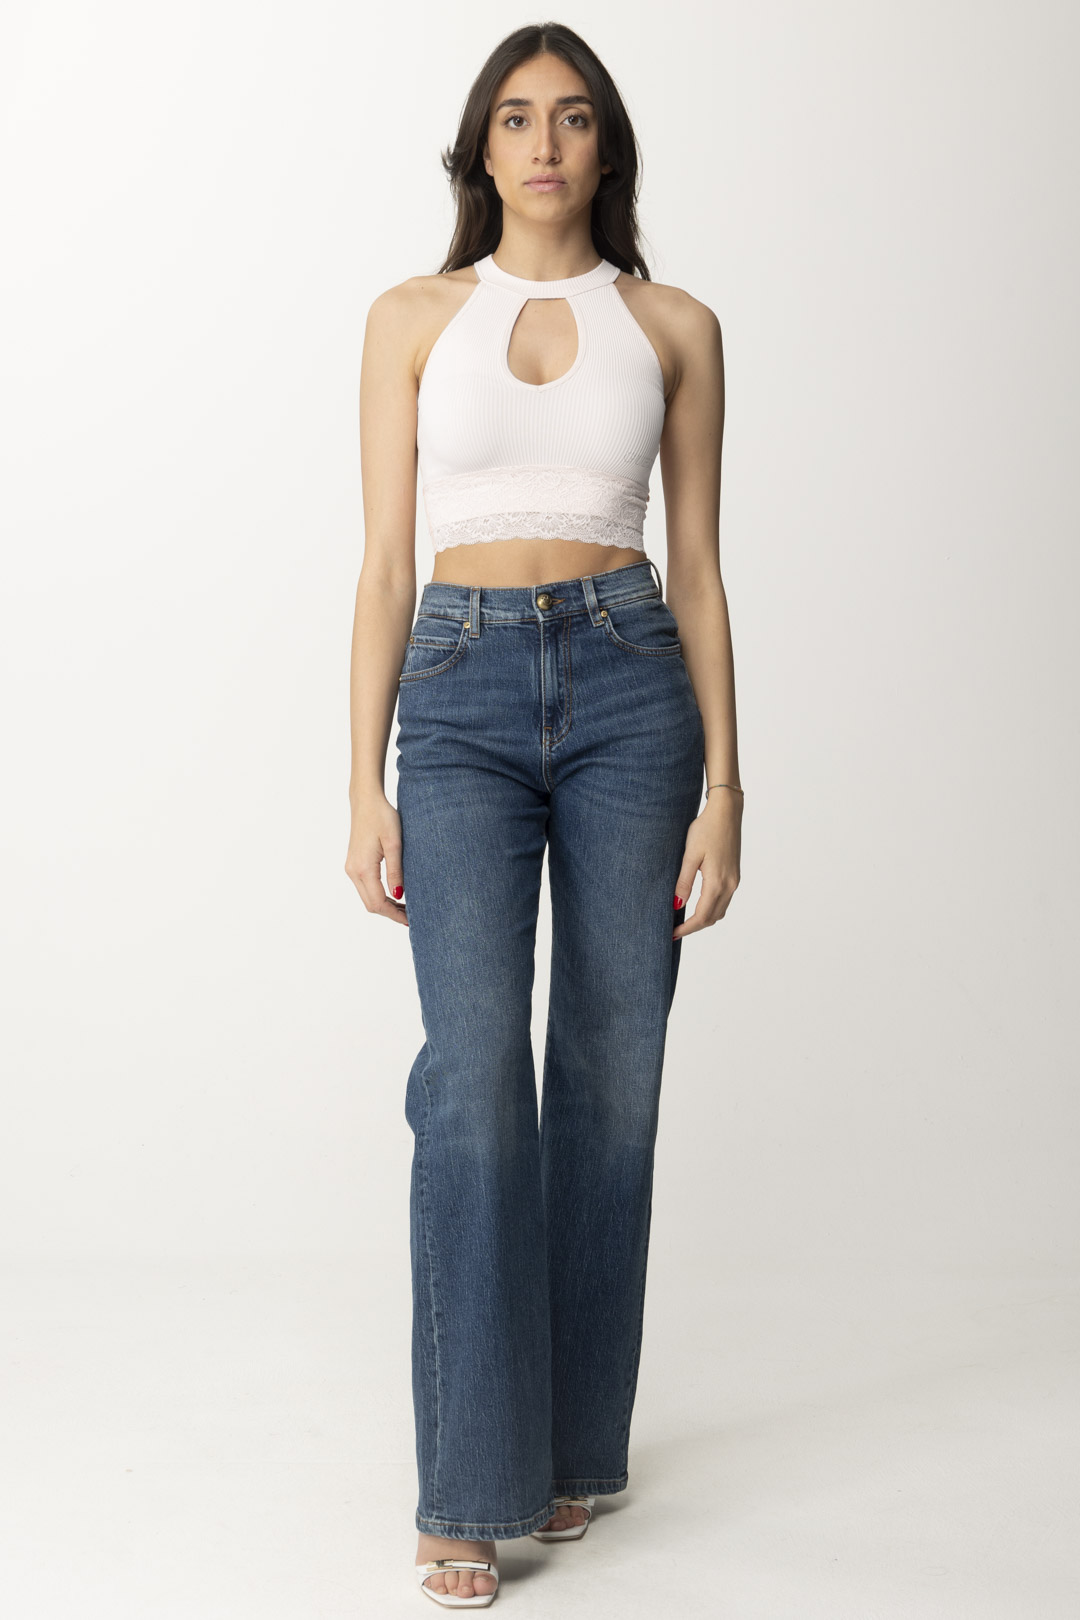 Preview: Guess Crop Top in Tricot with Lace Hem Pure White